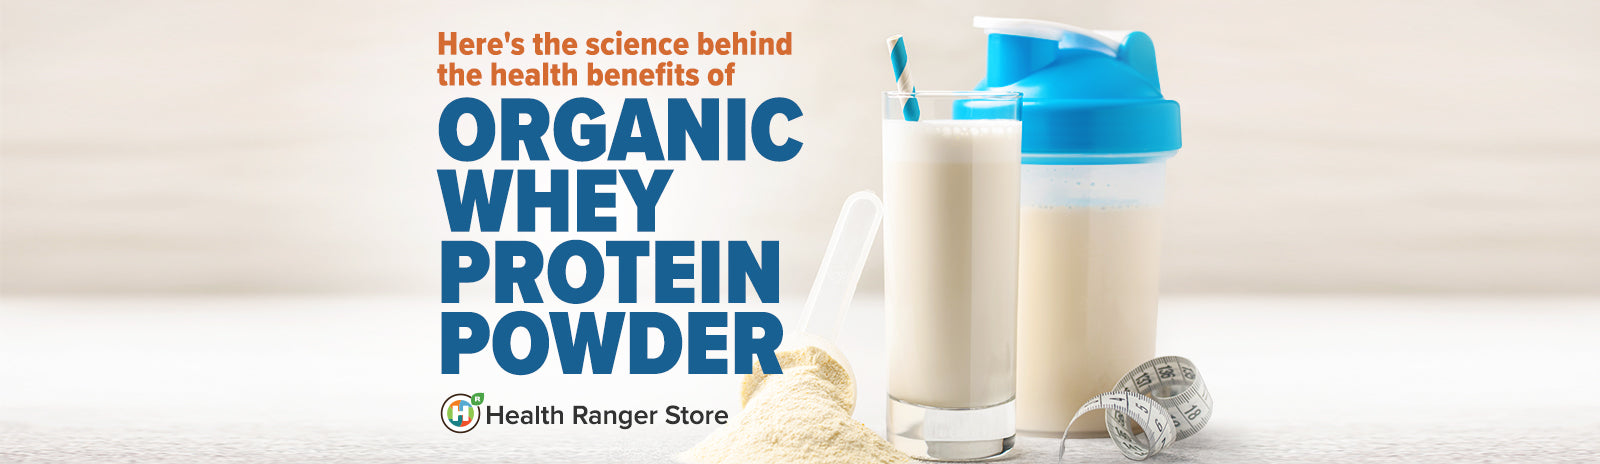 Here's the science behind the health benefits of organic whey protein powder